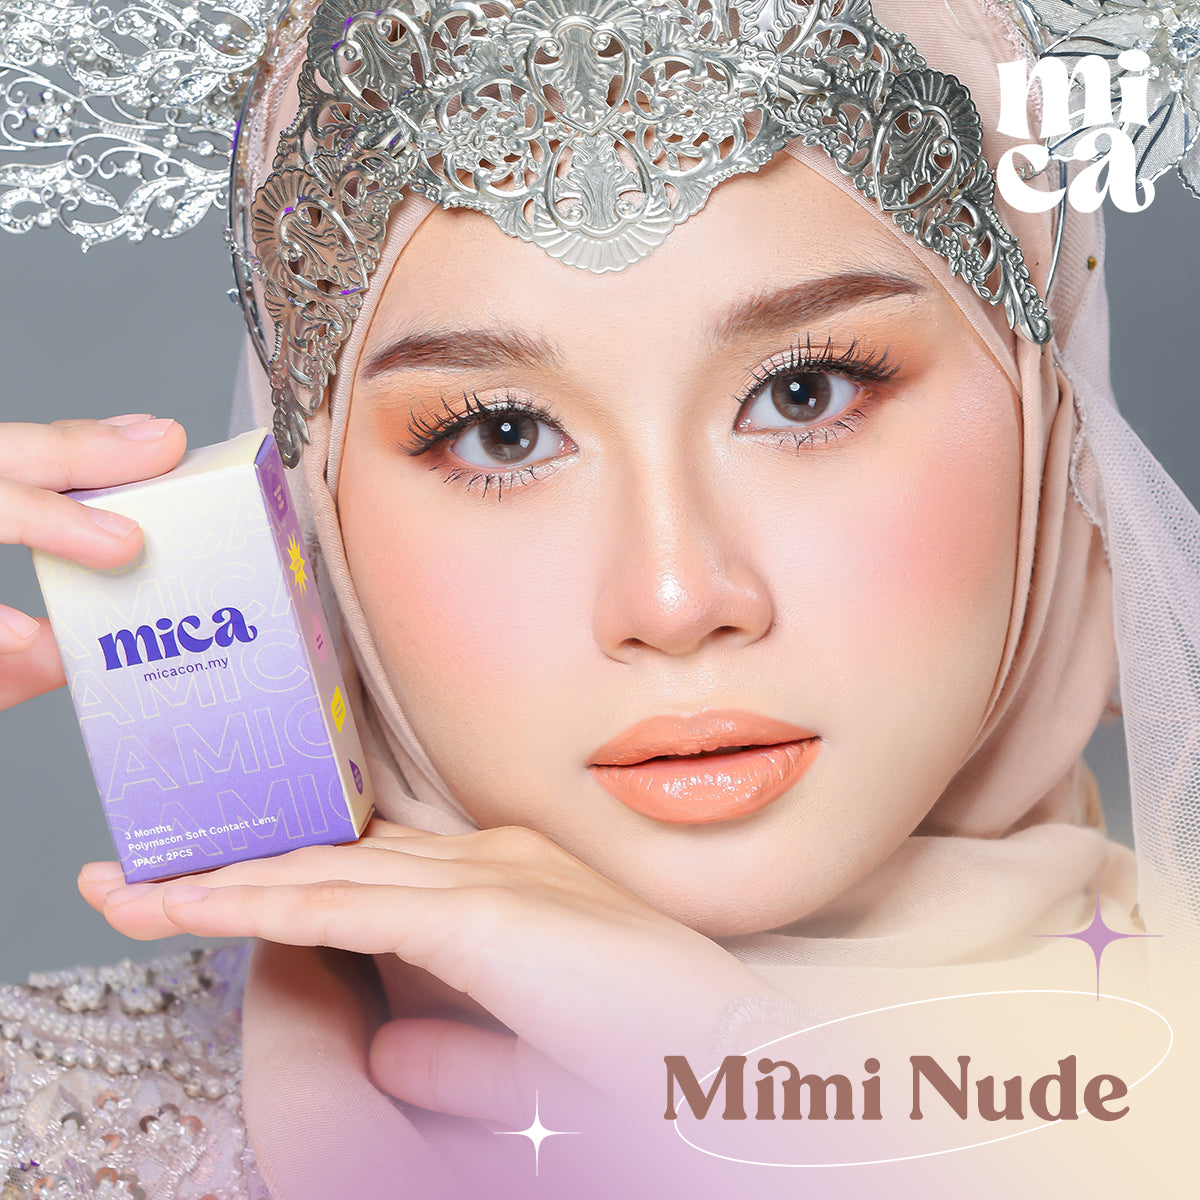 Mimi Nude 0-800 Micacon contact lens 100% Safe Certified by MDA